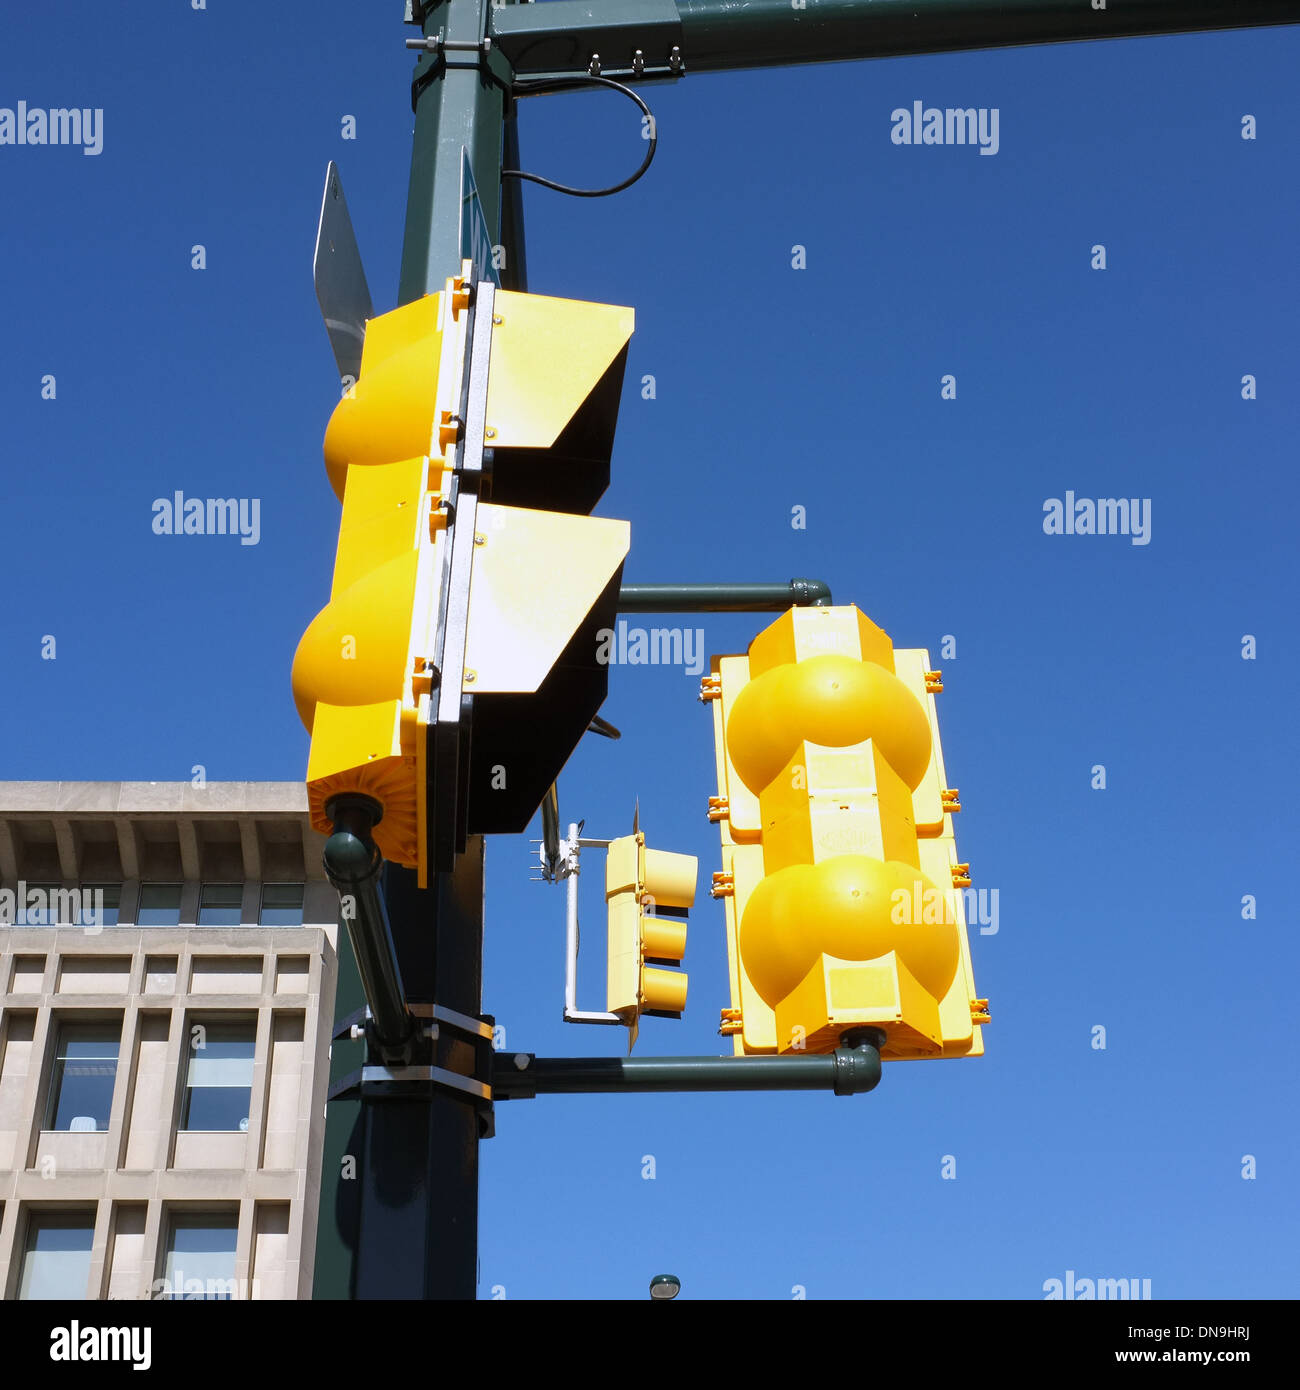 Canadian yellow traffic signals in Ontario. Stock Photo